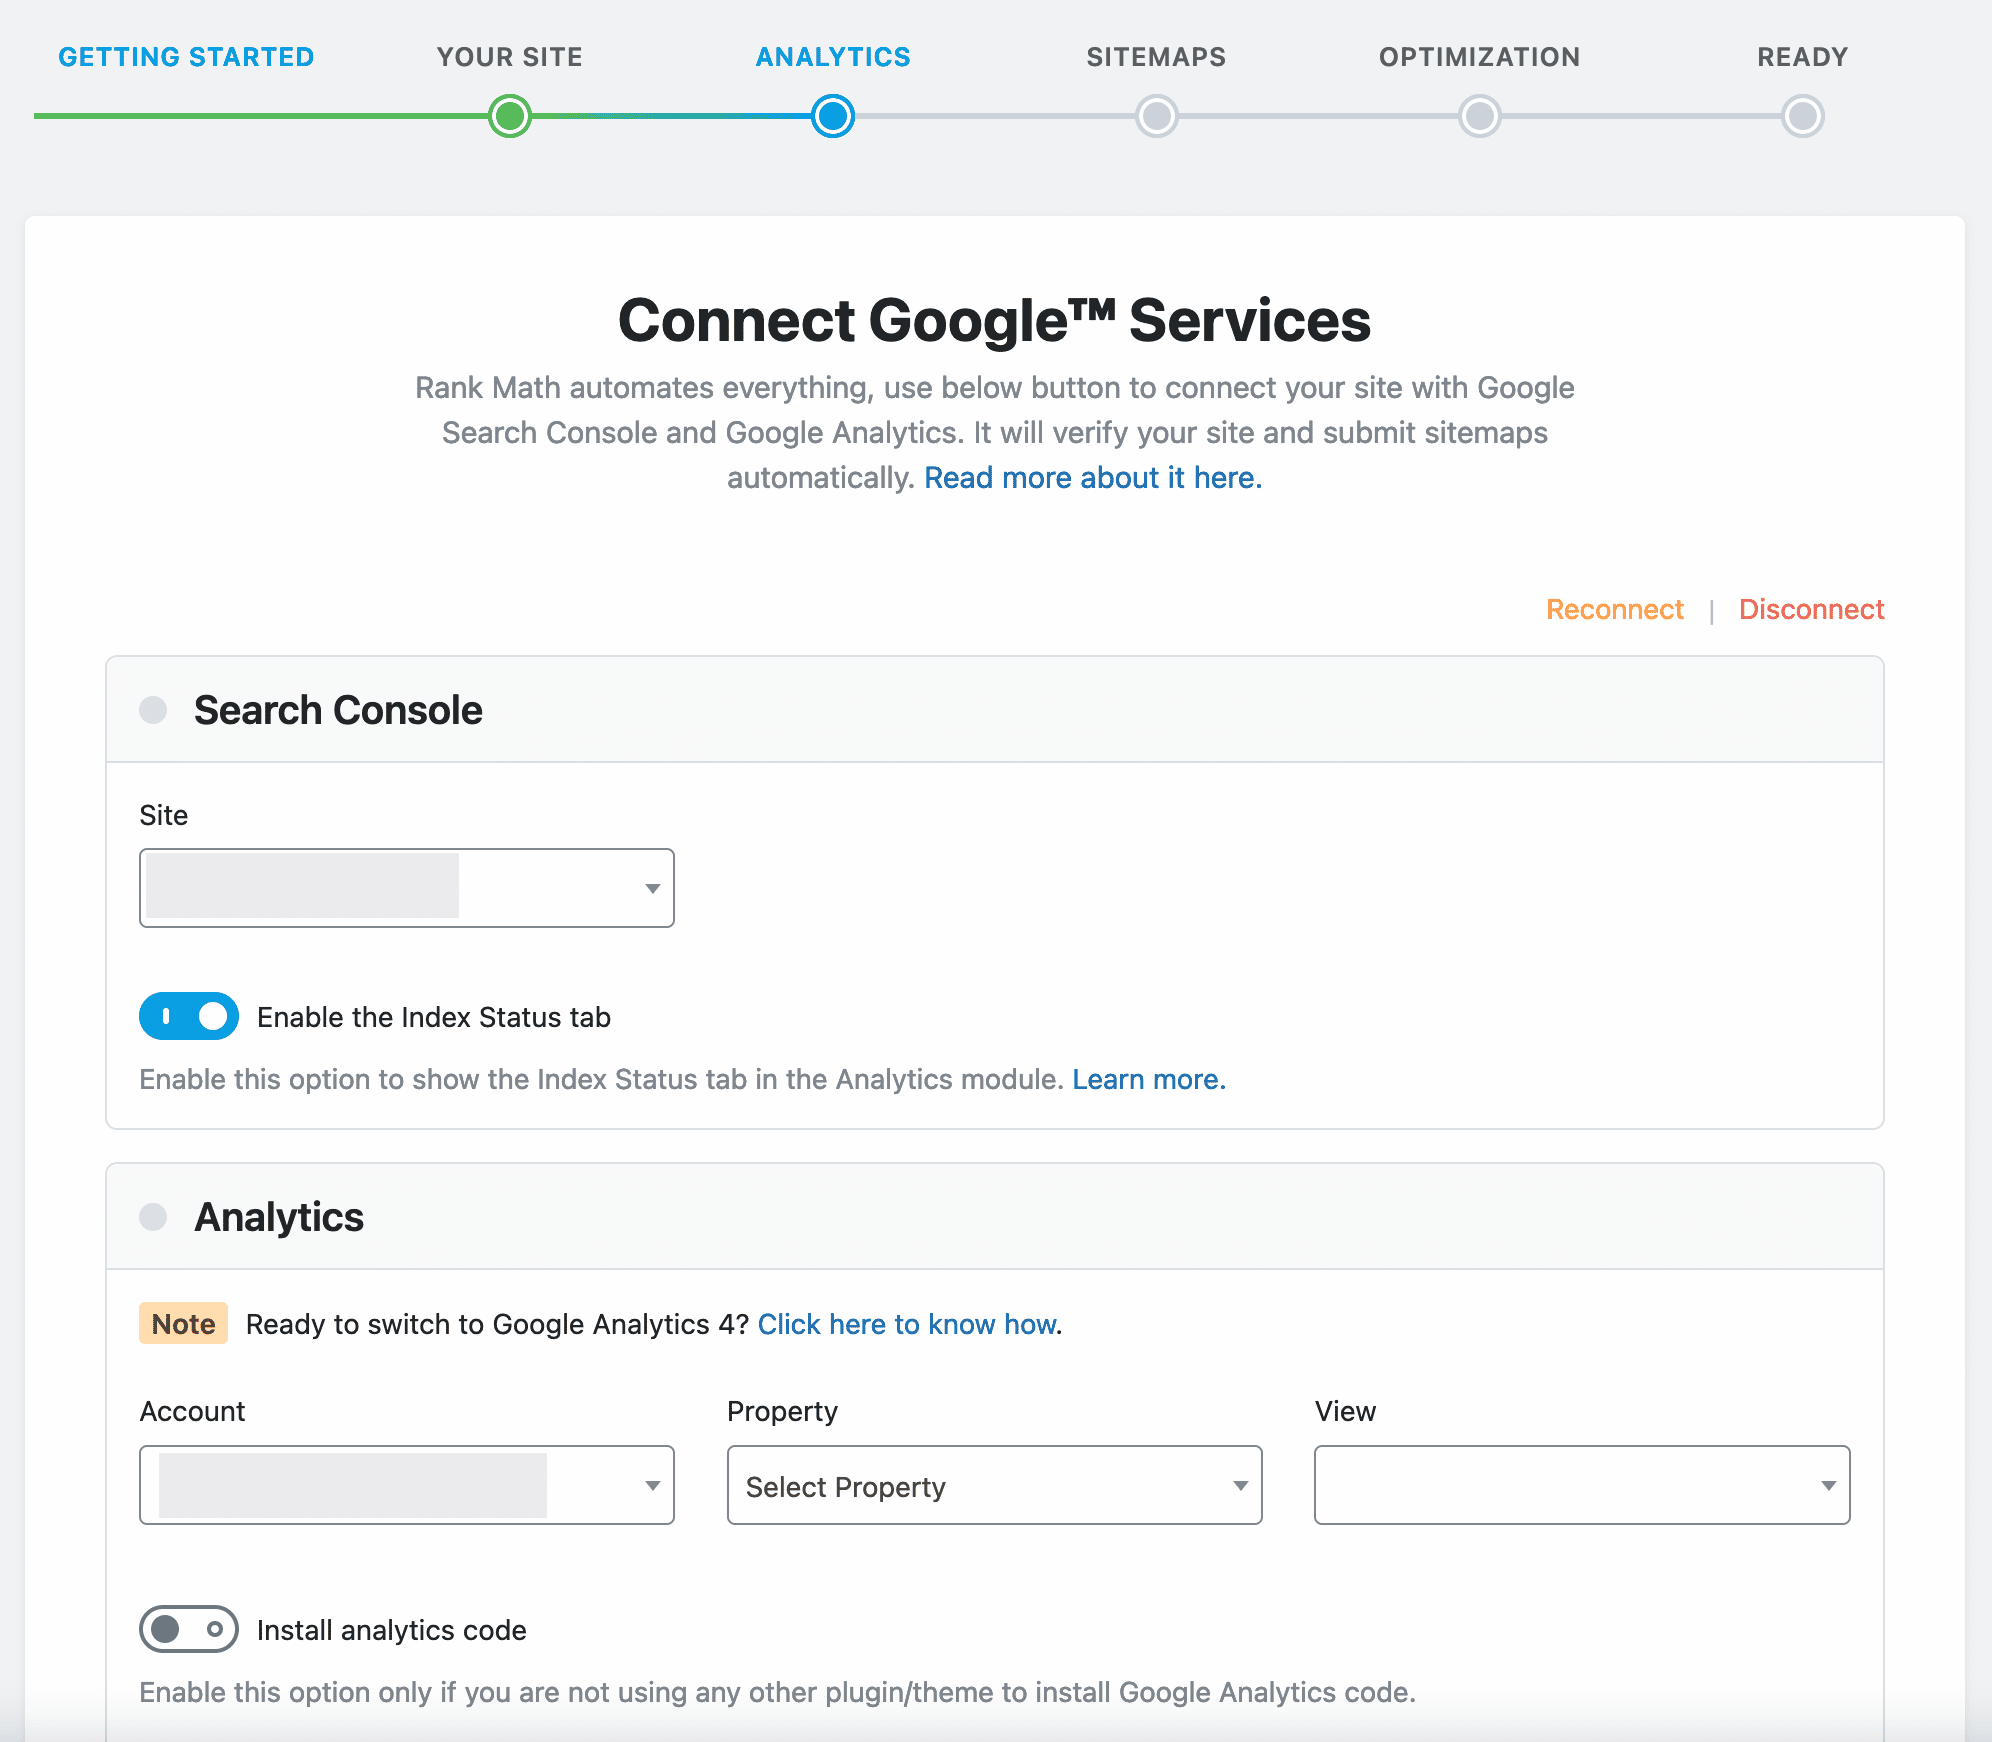 Connecting Rank Math to the Google Search Console.